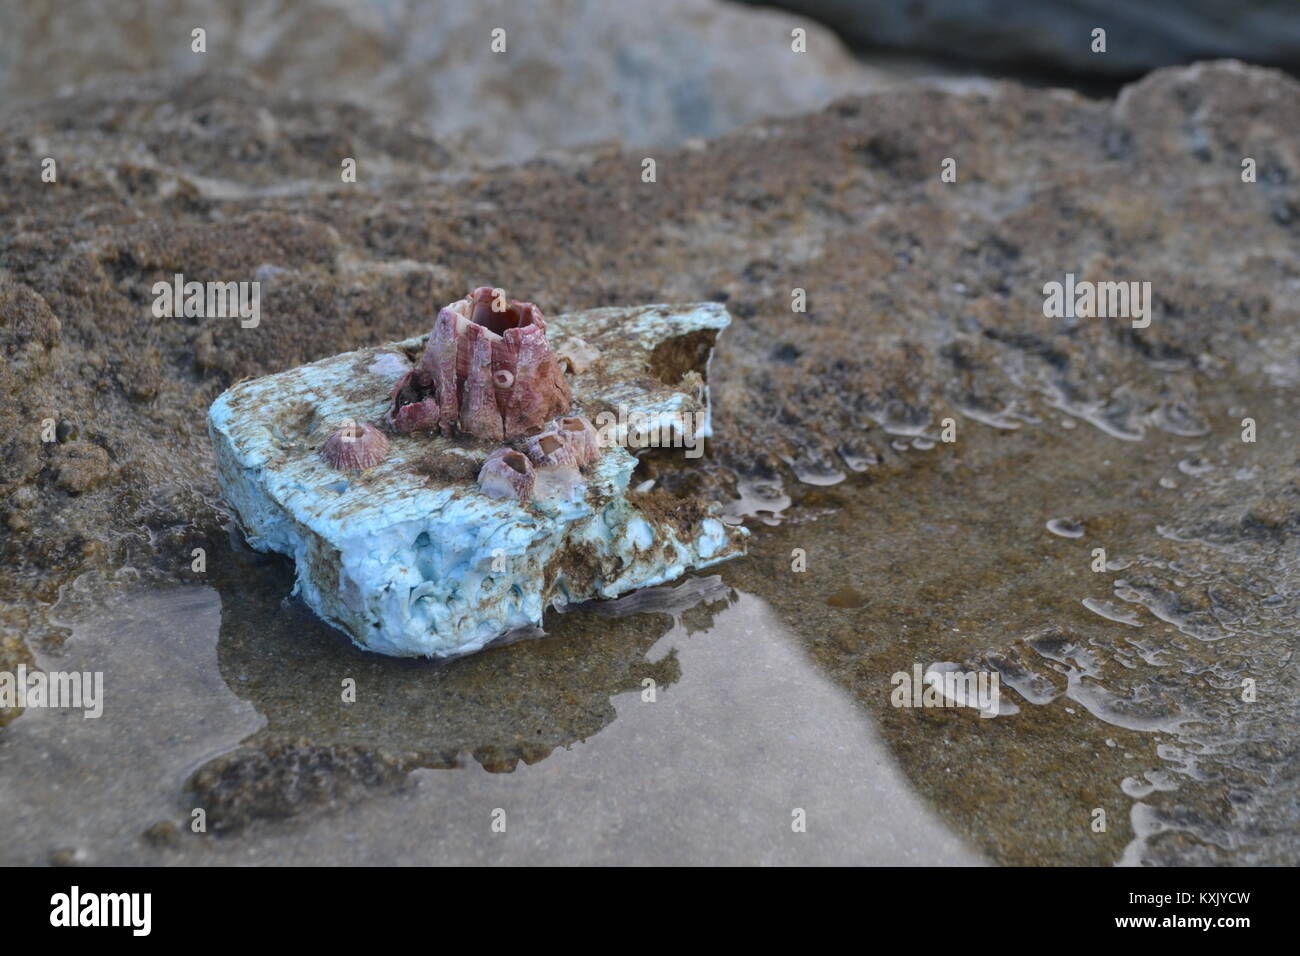 Barnacle on Marine Plastic Debris, stranded by the Atlantic Ocean at a beach in Portugal. Stock Photo